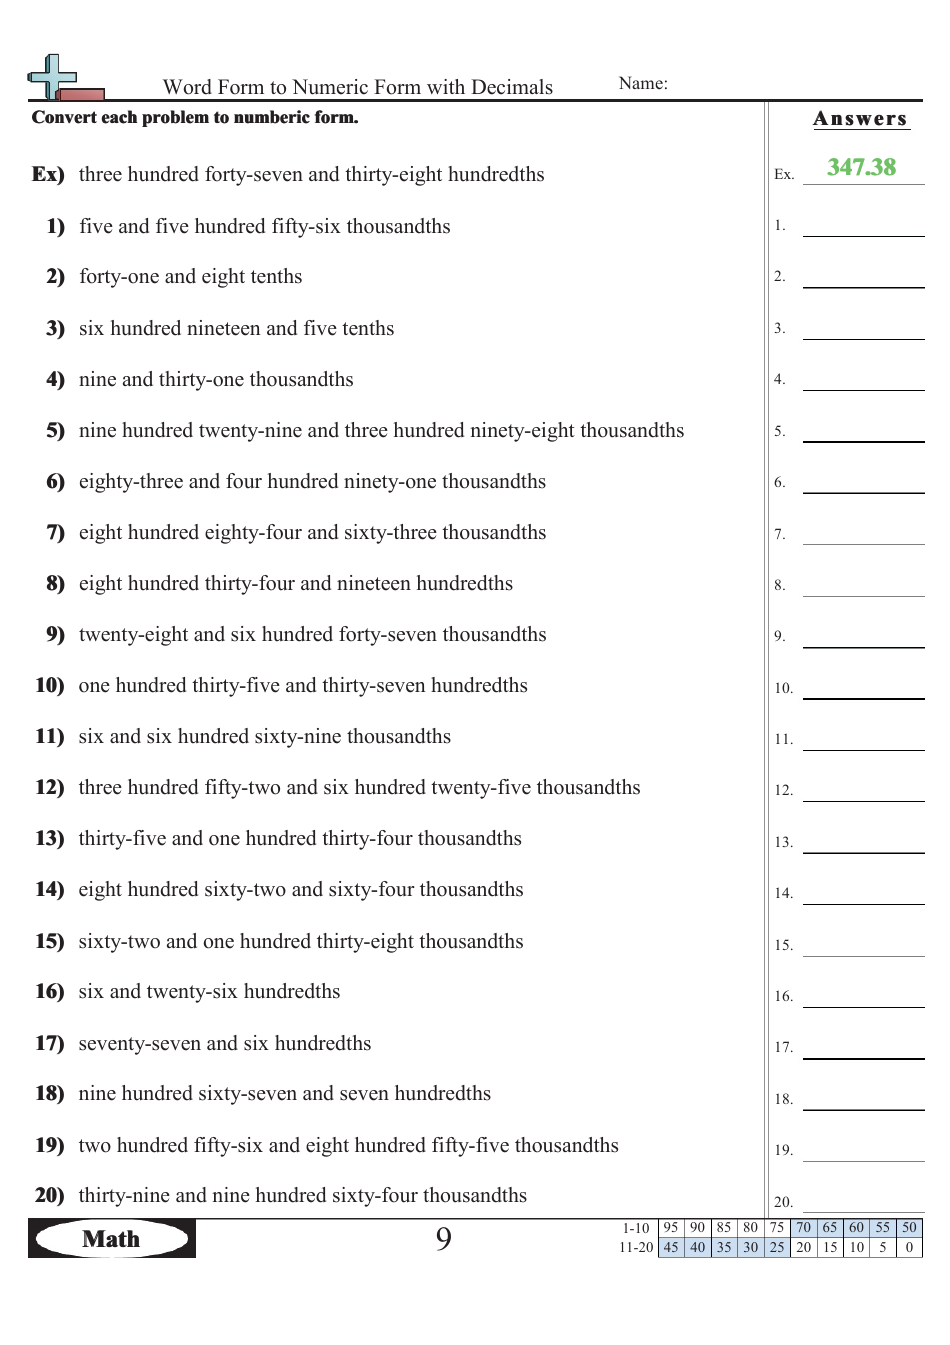 Word Form to Numeric Form With Decimals Worksheet With Answers - 347.38, Page 1